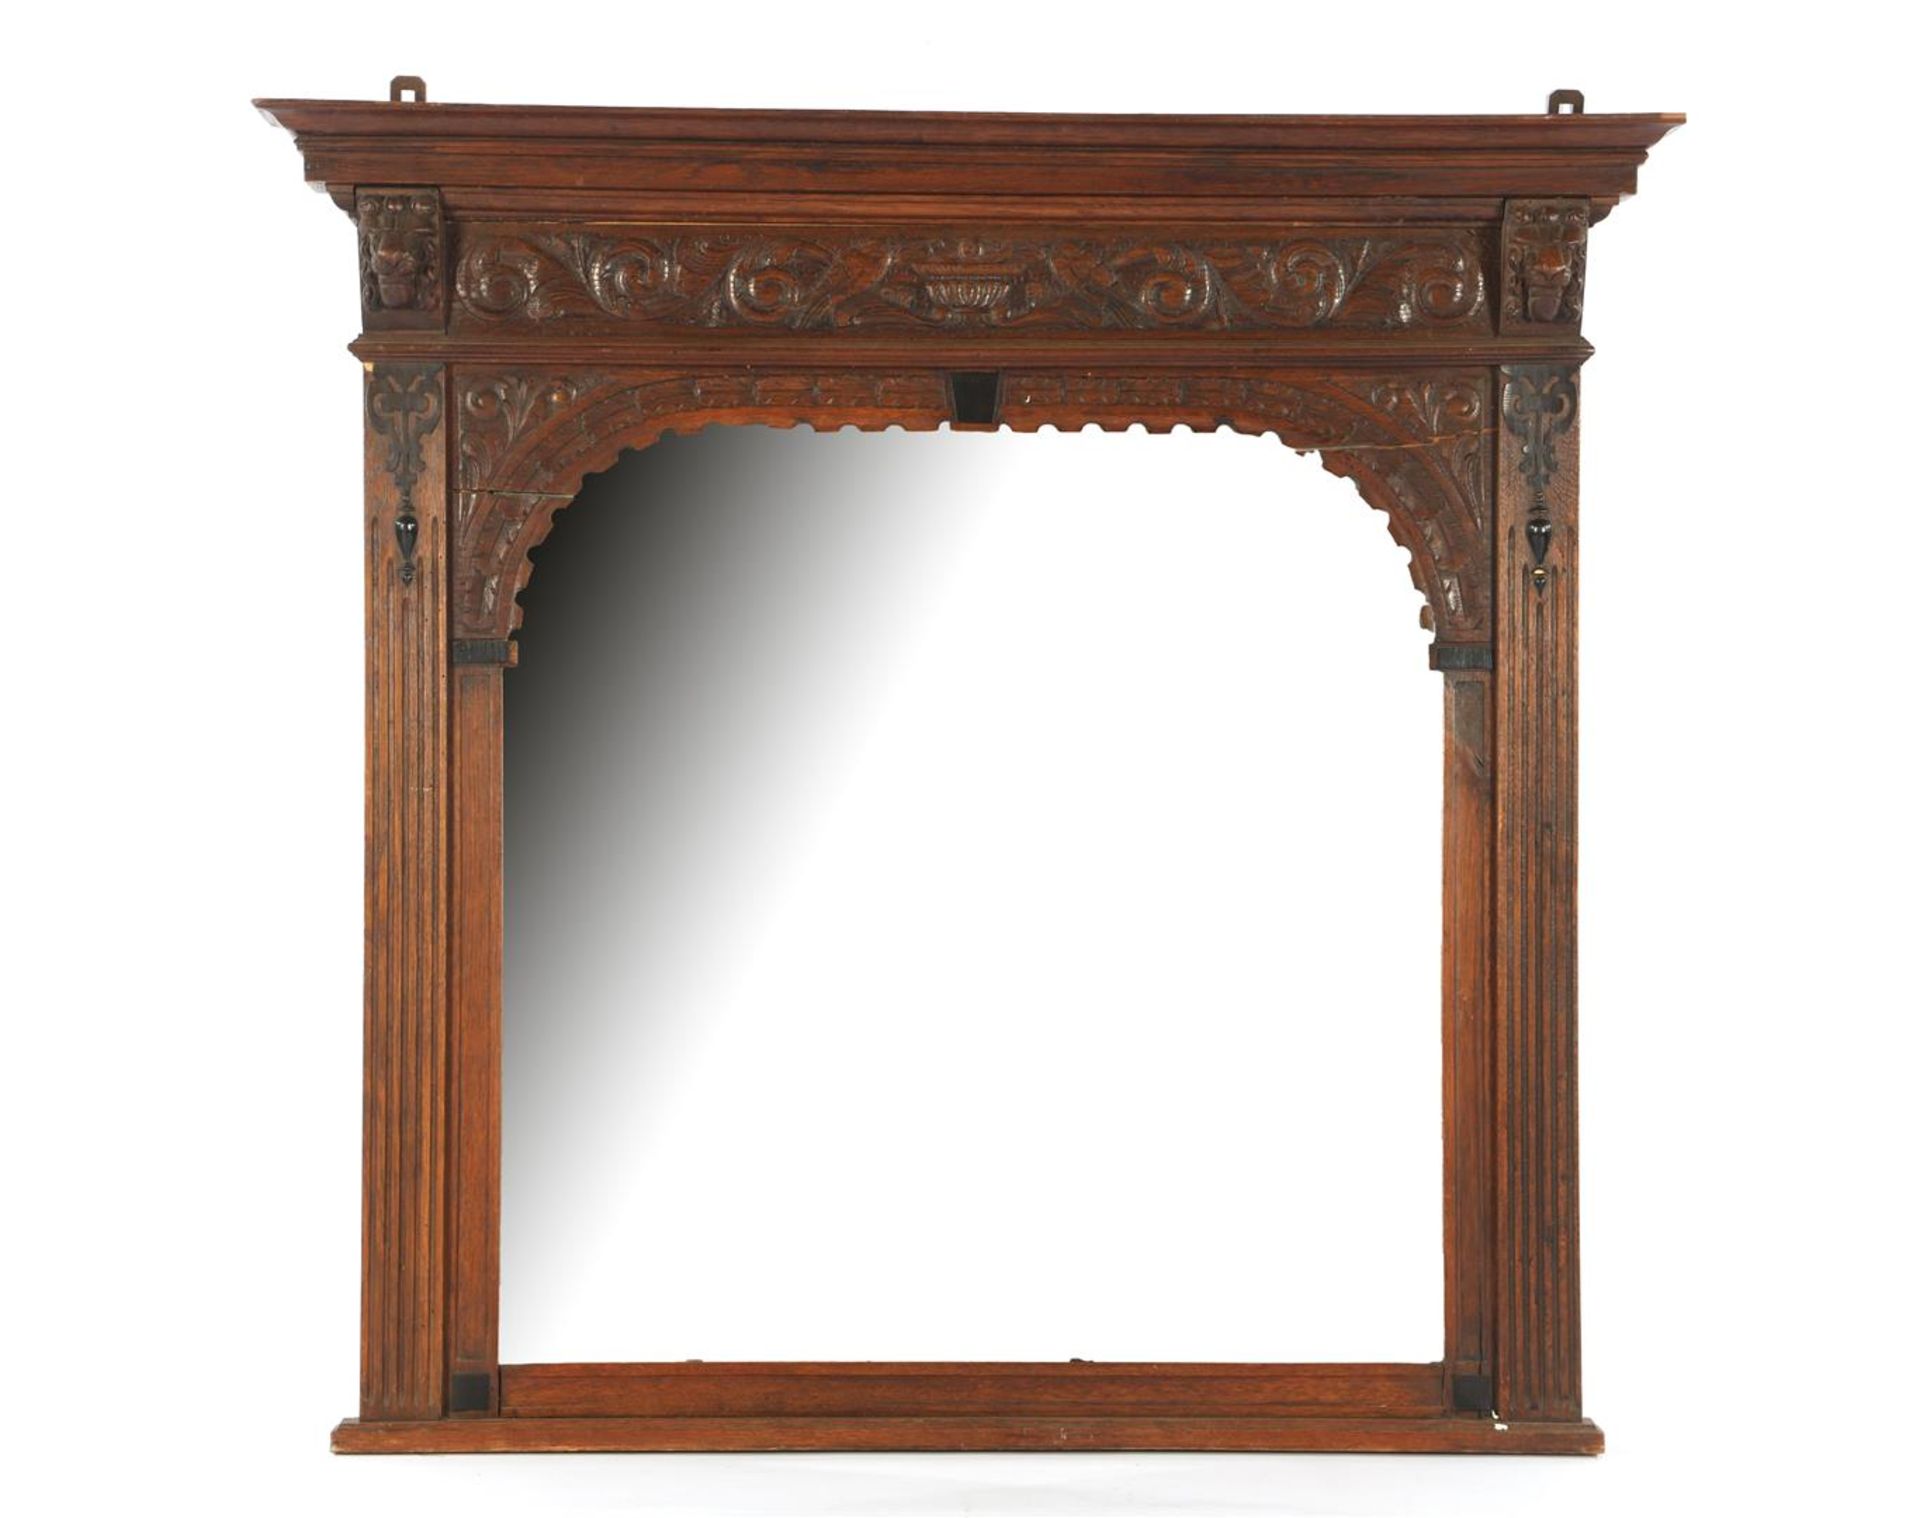 Mirror in an oak richly decorated frame with lion masks, 96x101 cm